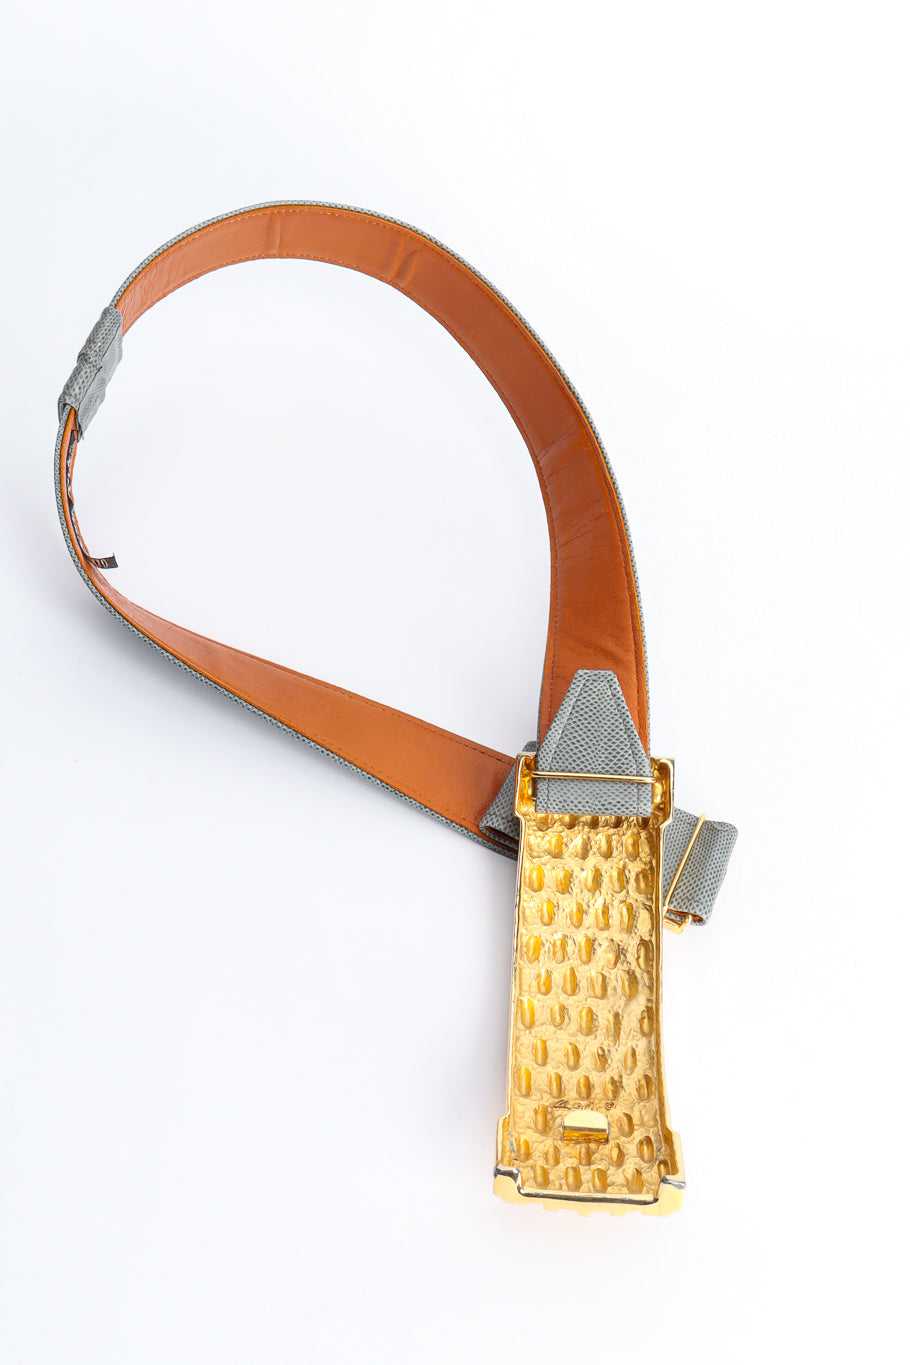 Grey lizard belt with textured gold basket weave buckle by Alexis Kirk inside of leather and buckle  @recessla